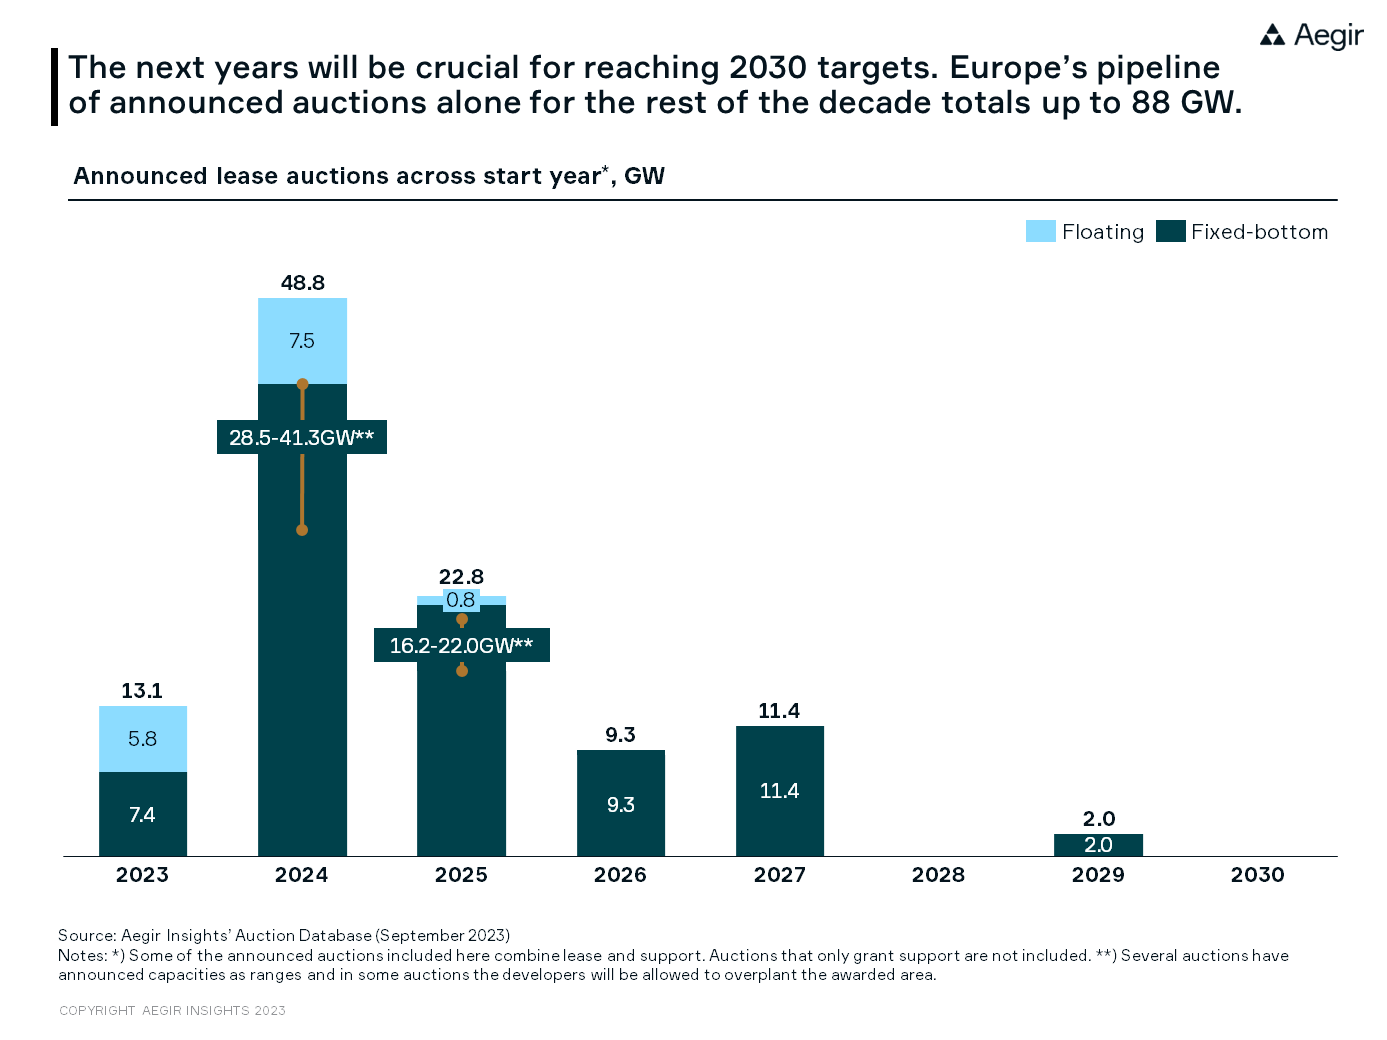 2024 will be the busiest year for offshore wind auctions worldwide: The next years will be crucial for reaching 2030 targets. Europe's pipeline of announced auctions alone for the rest of the decade totals up to 88 GW.